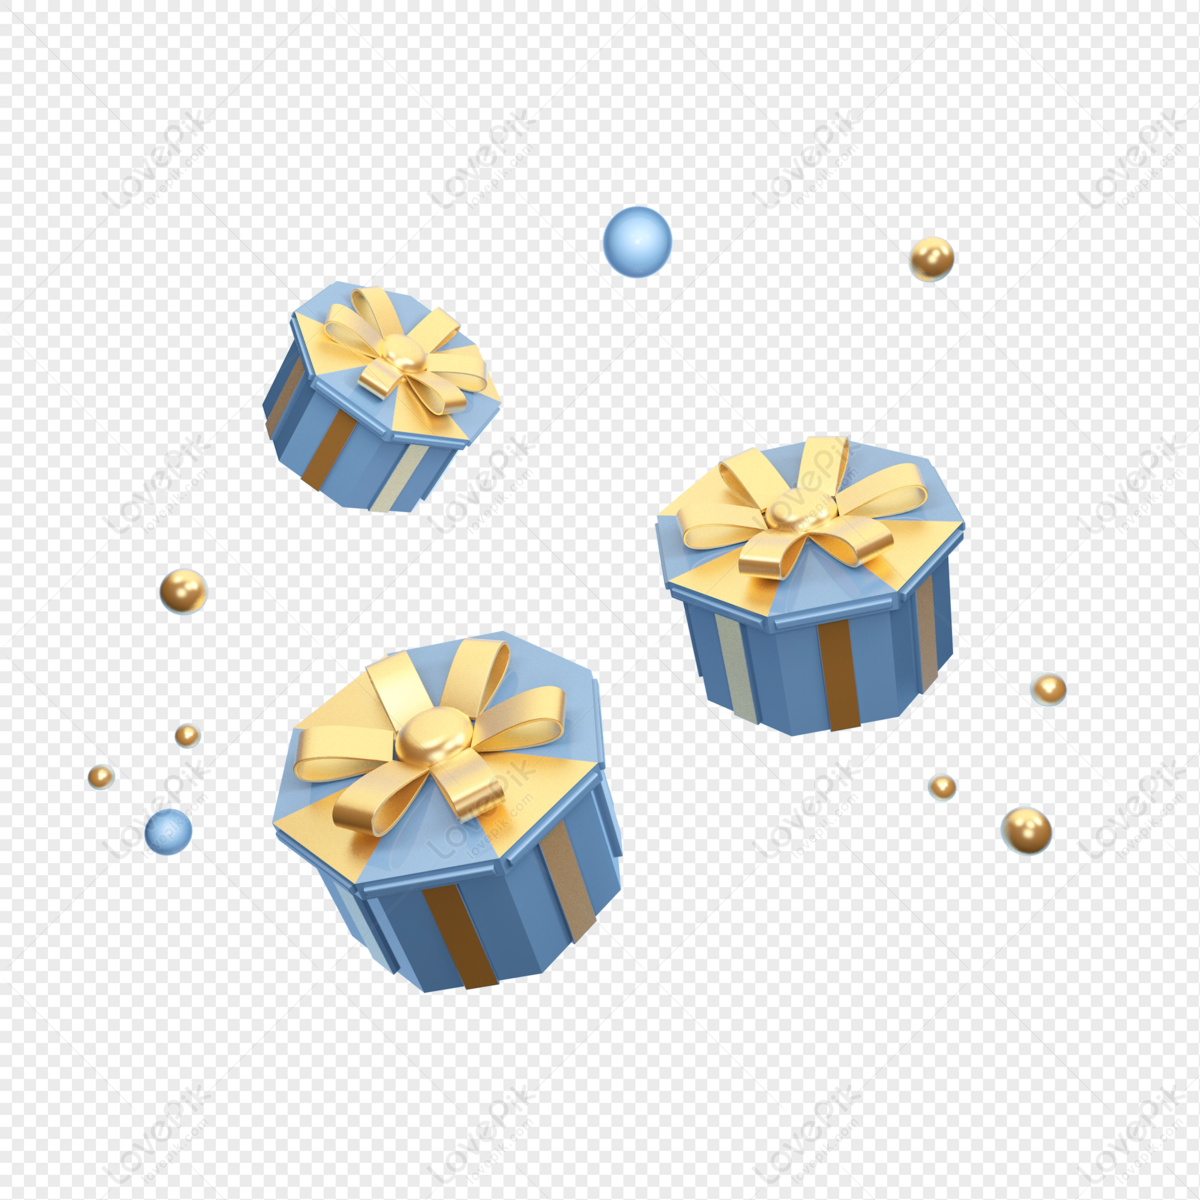 Christmas gift box boxes decorated Royalty Free Vector Image